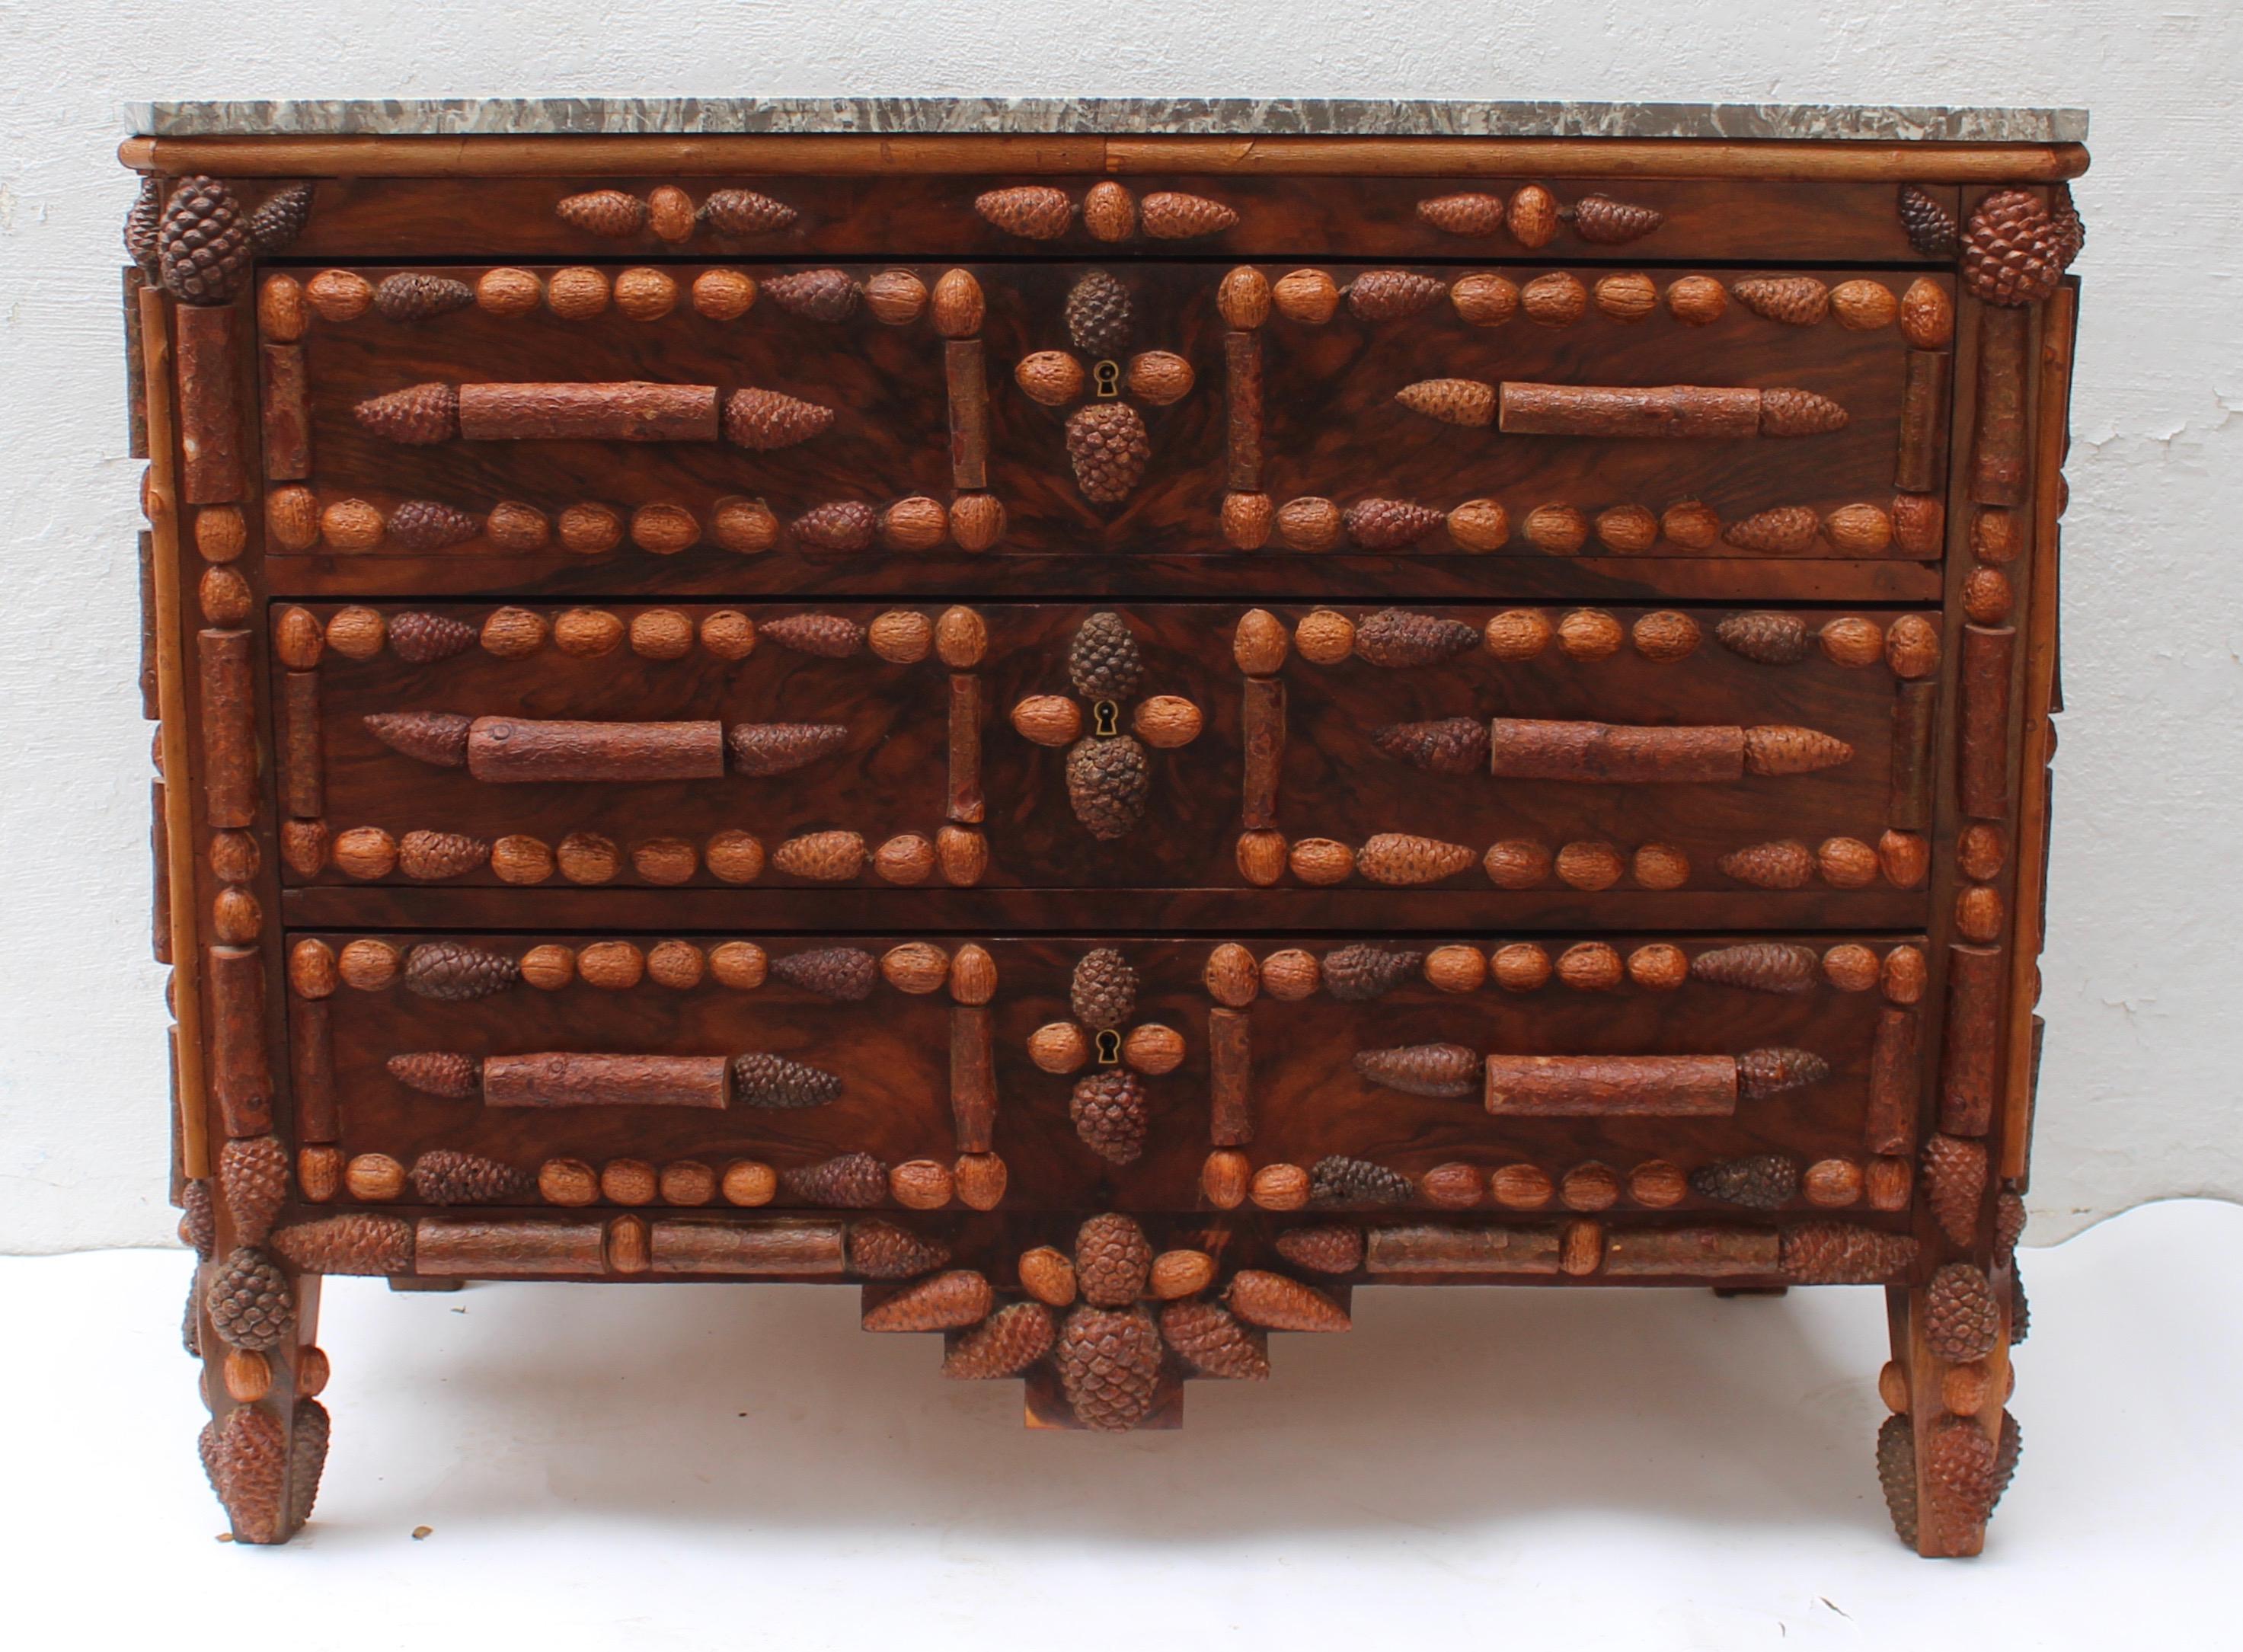 Italian walnut and pinecone decorated chest of drawers with marble top.